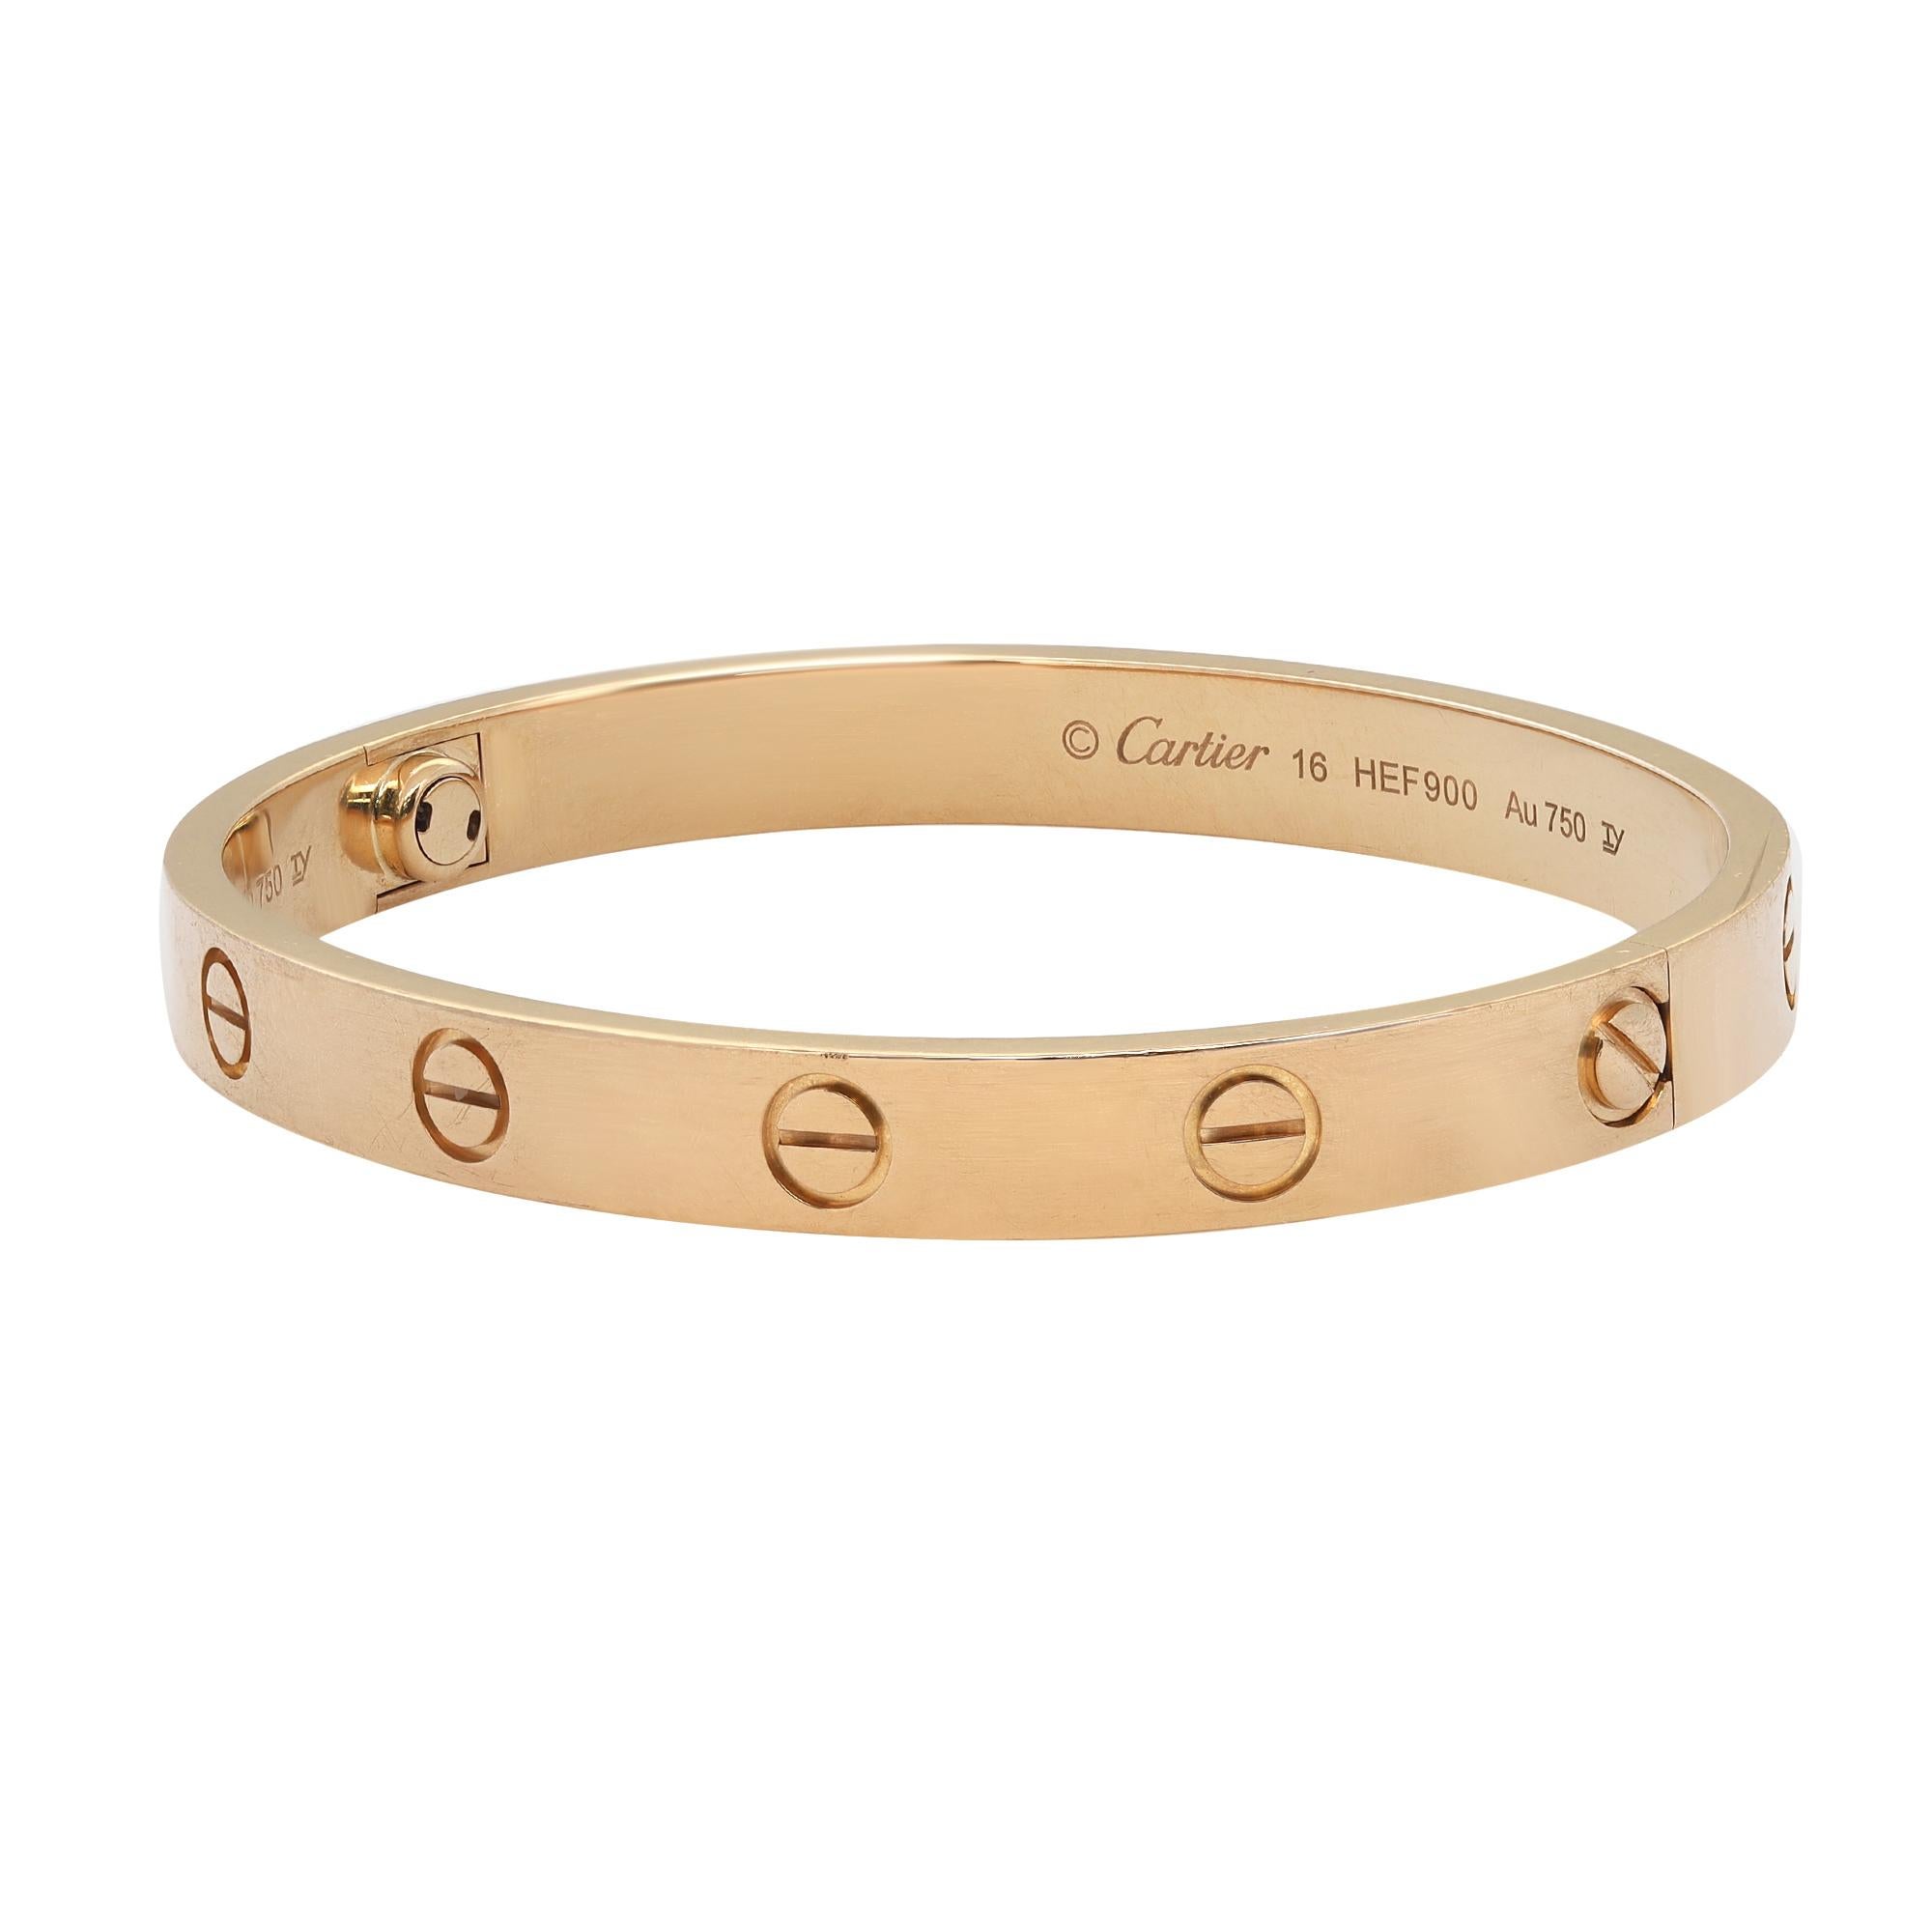 Cartier classic 18K yellow gold Love bangle bracelet size 16. Width: 6.1mm. New style screw system. Excellent preowned condition. Comes with a screwdriver, an original box and a certificate. 
